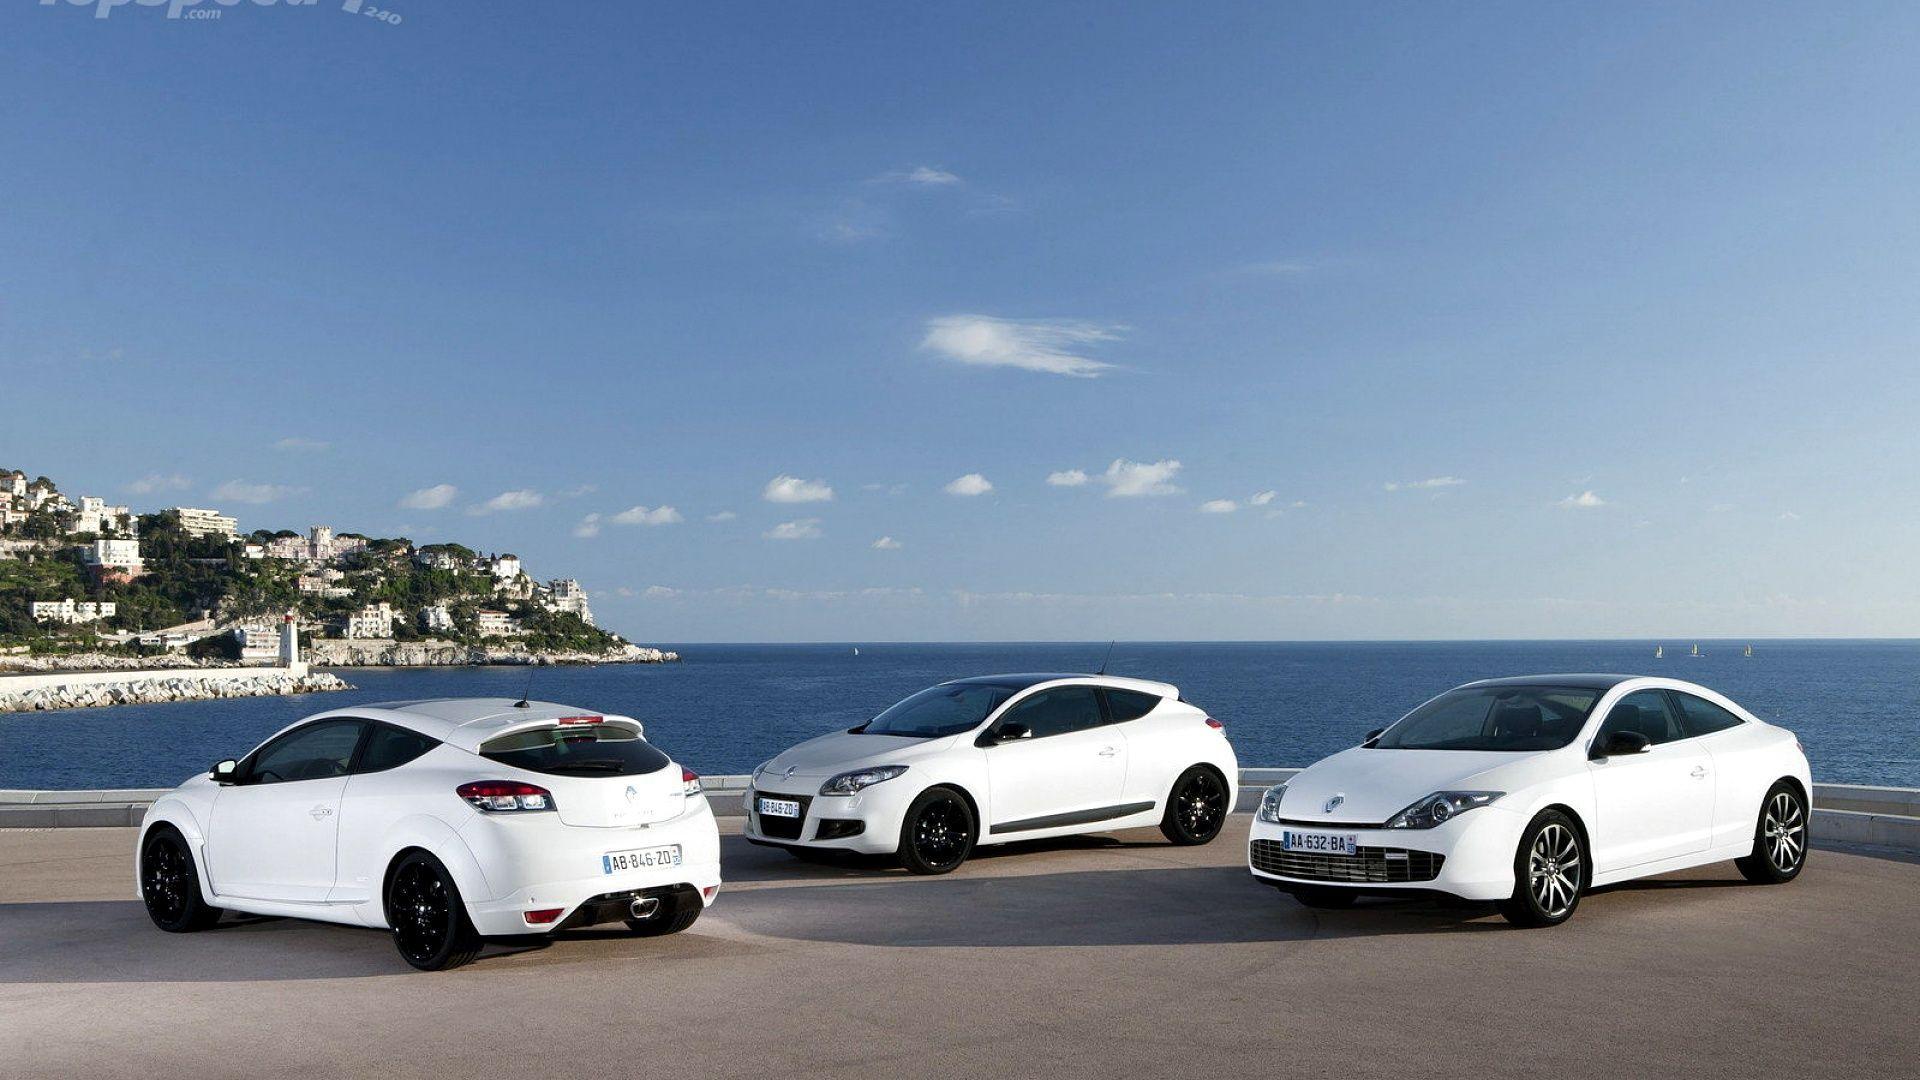 Renault cars on HD wallpaper. HD car wallpaper with Renault